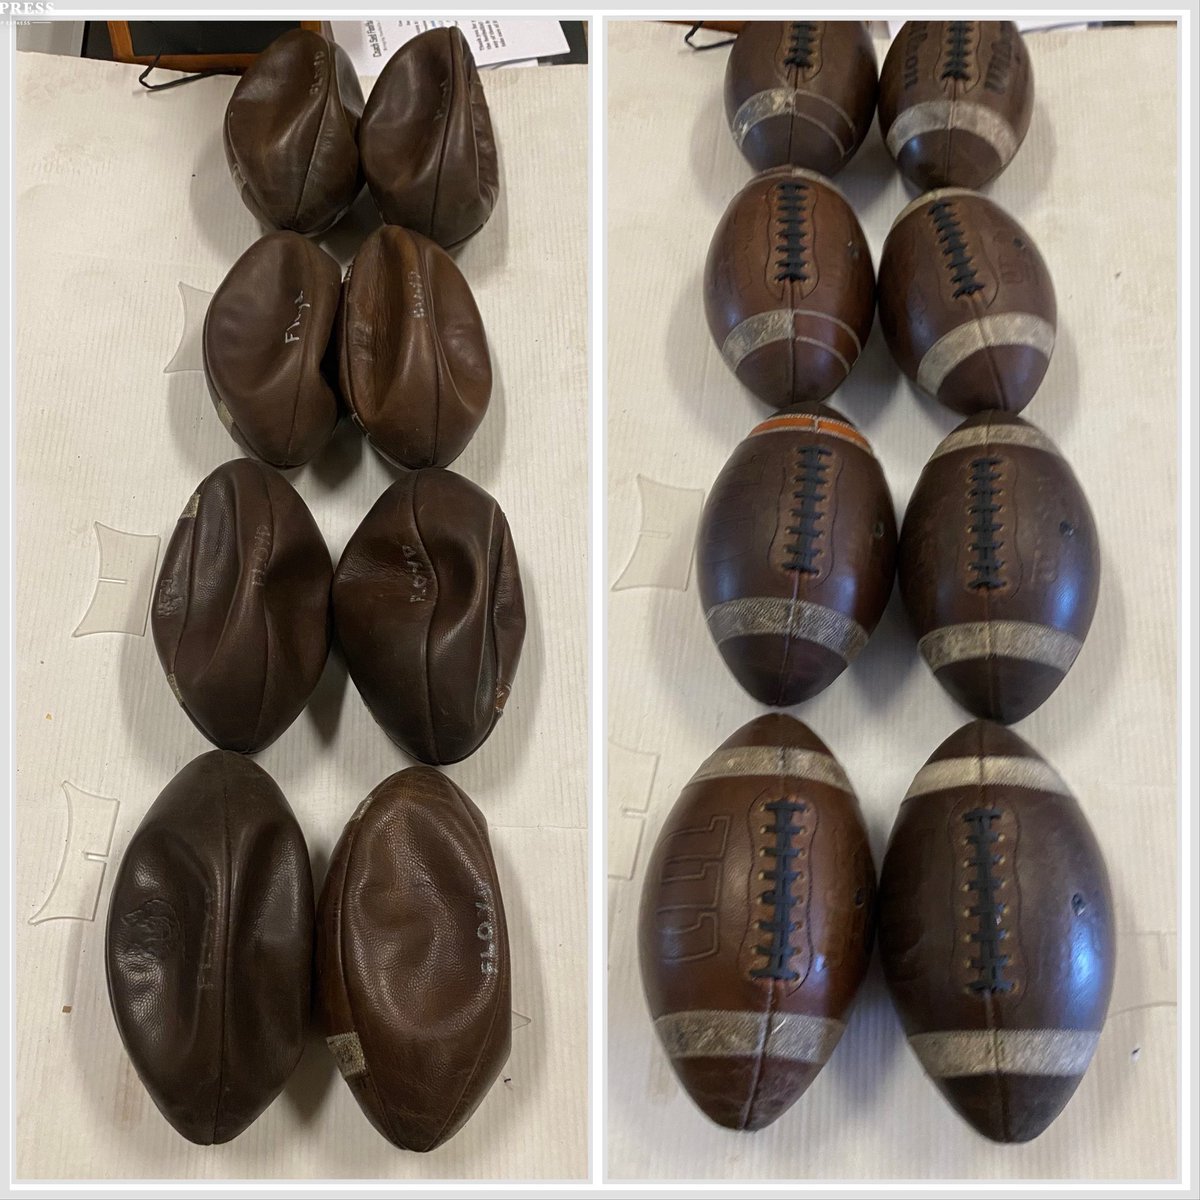 8 footballs repaired for @FloydKanyon, an incoming Freshman scholarship punter at Arizona State University, and his brother @Ryker_Floyd, a highly rated kicker and punter for Horizon High School in Arizona. If you need this service, contact me. CoachSedFBRepair.com